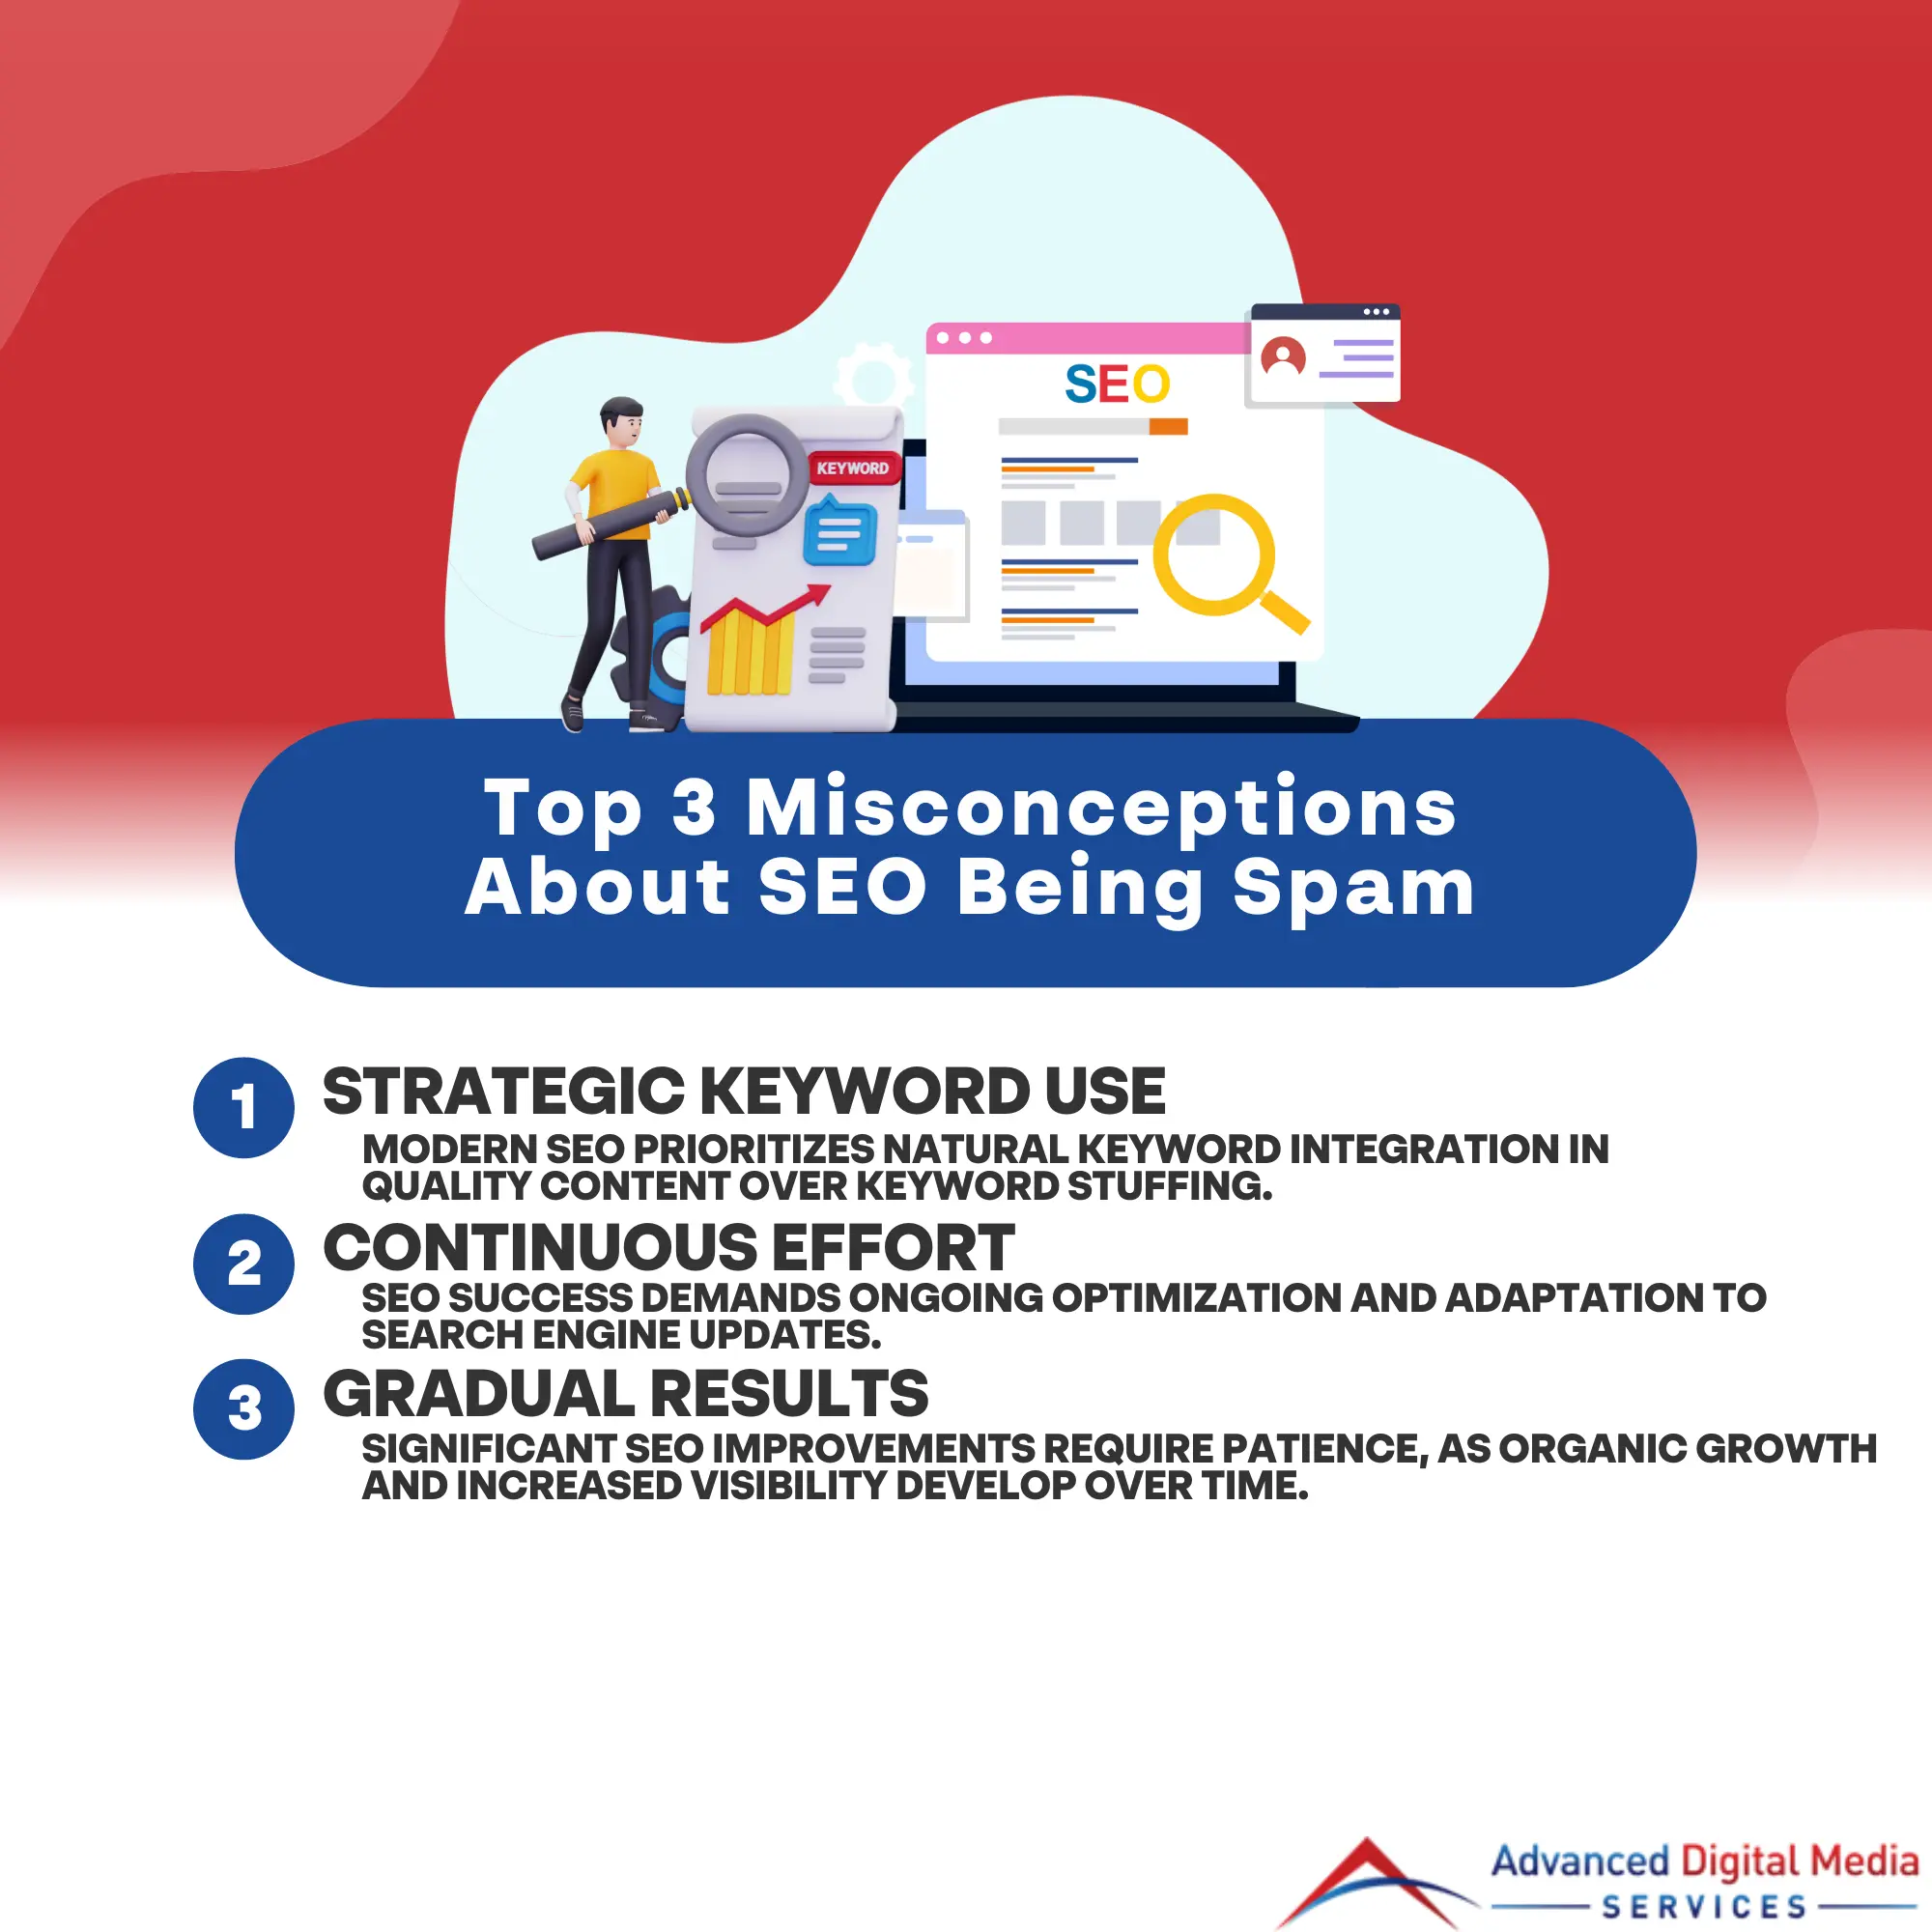 The Top 3 Misconceptions About SEO Being Spam